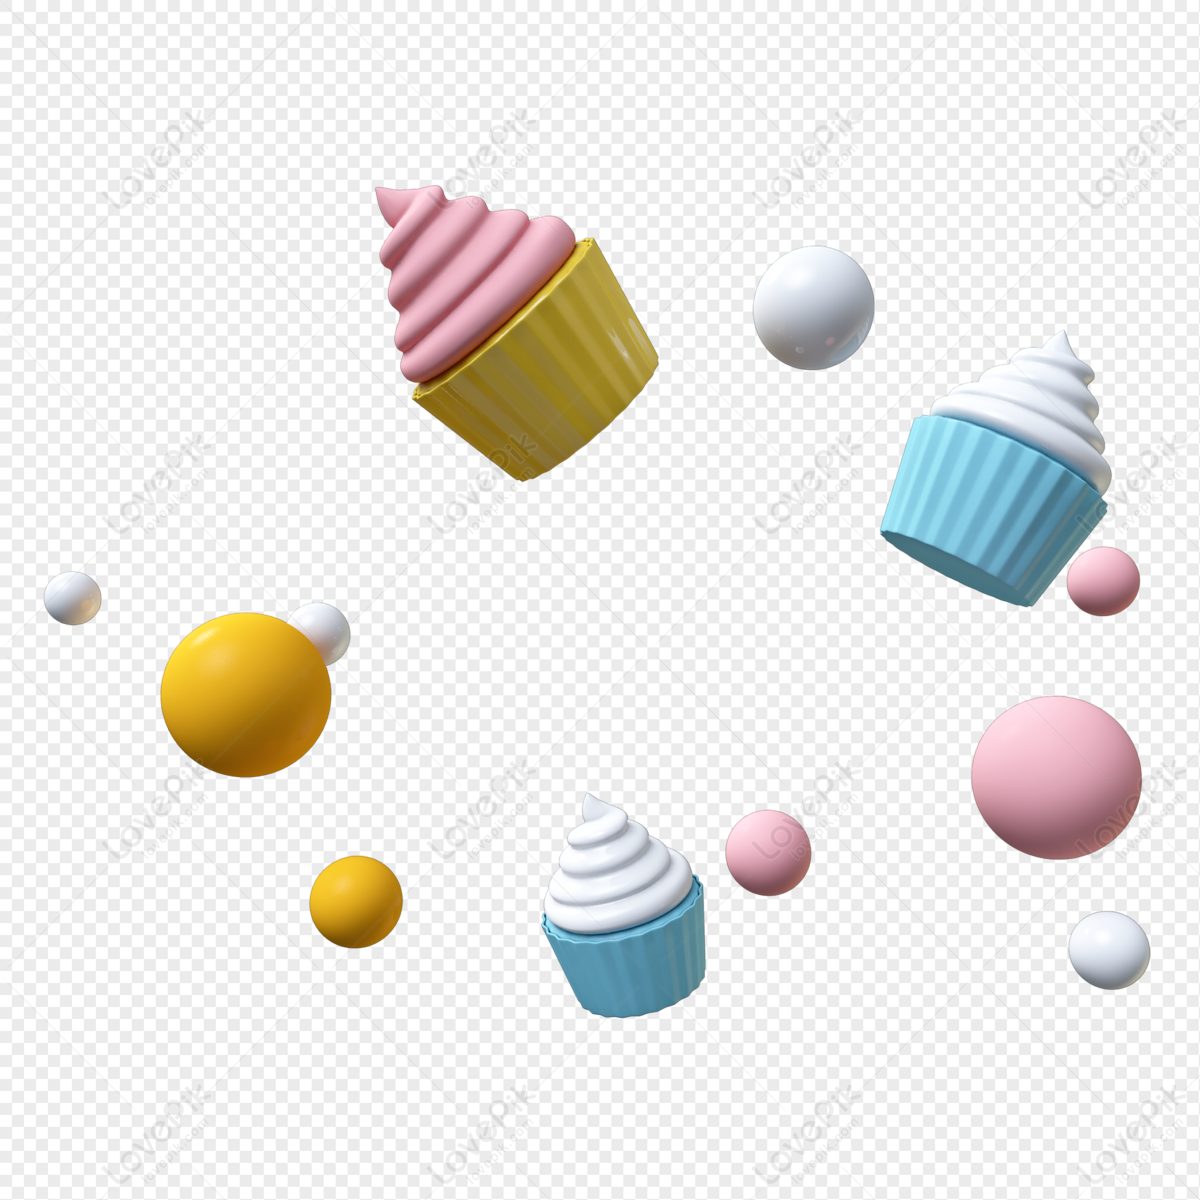 https://img.lovepik.com/free-png/20211125/lovepik-three-dimensional-paper-cup-ice-cream-ball-png-image_401134231_wh1200.png